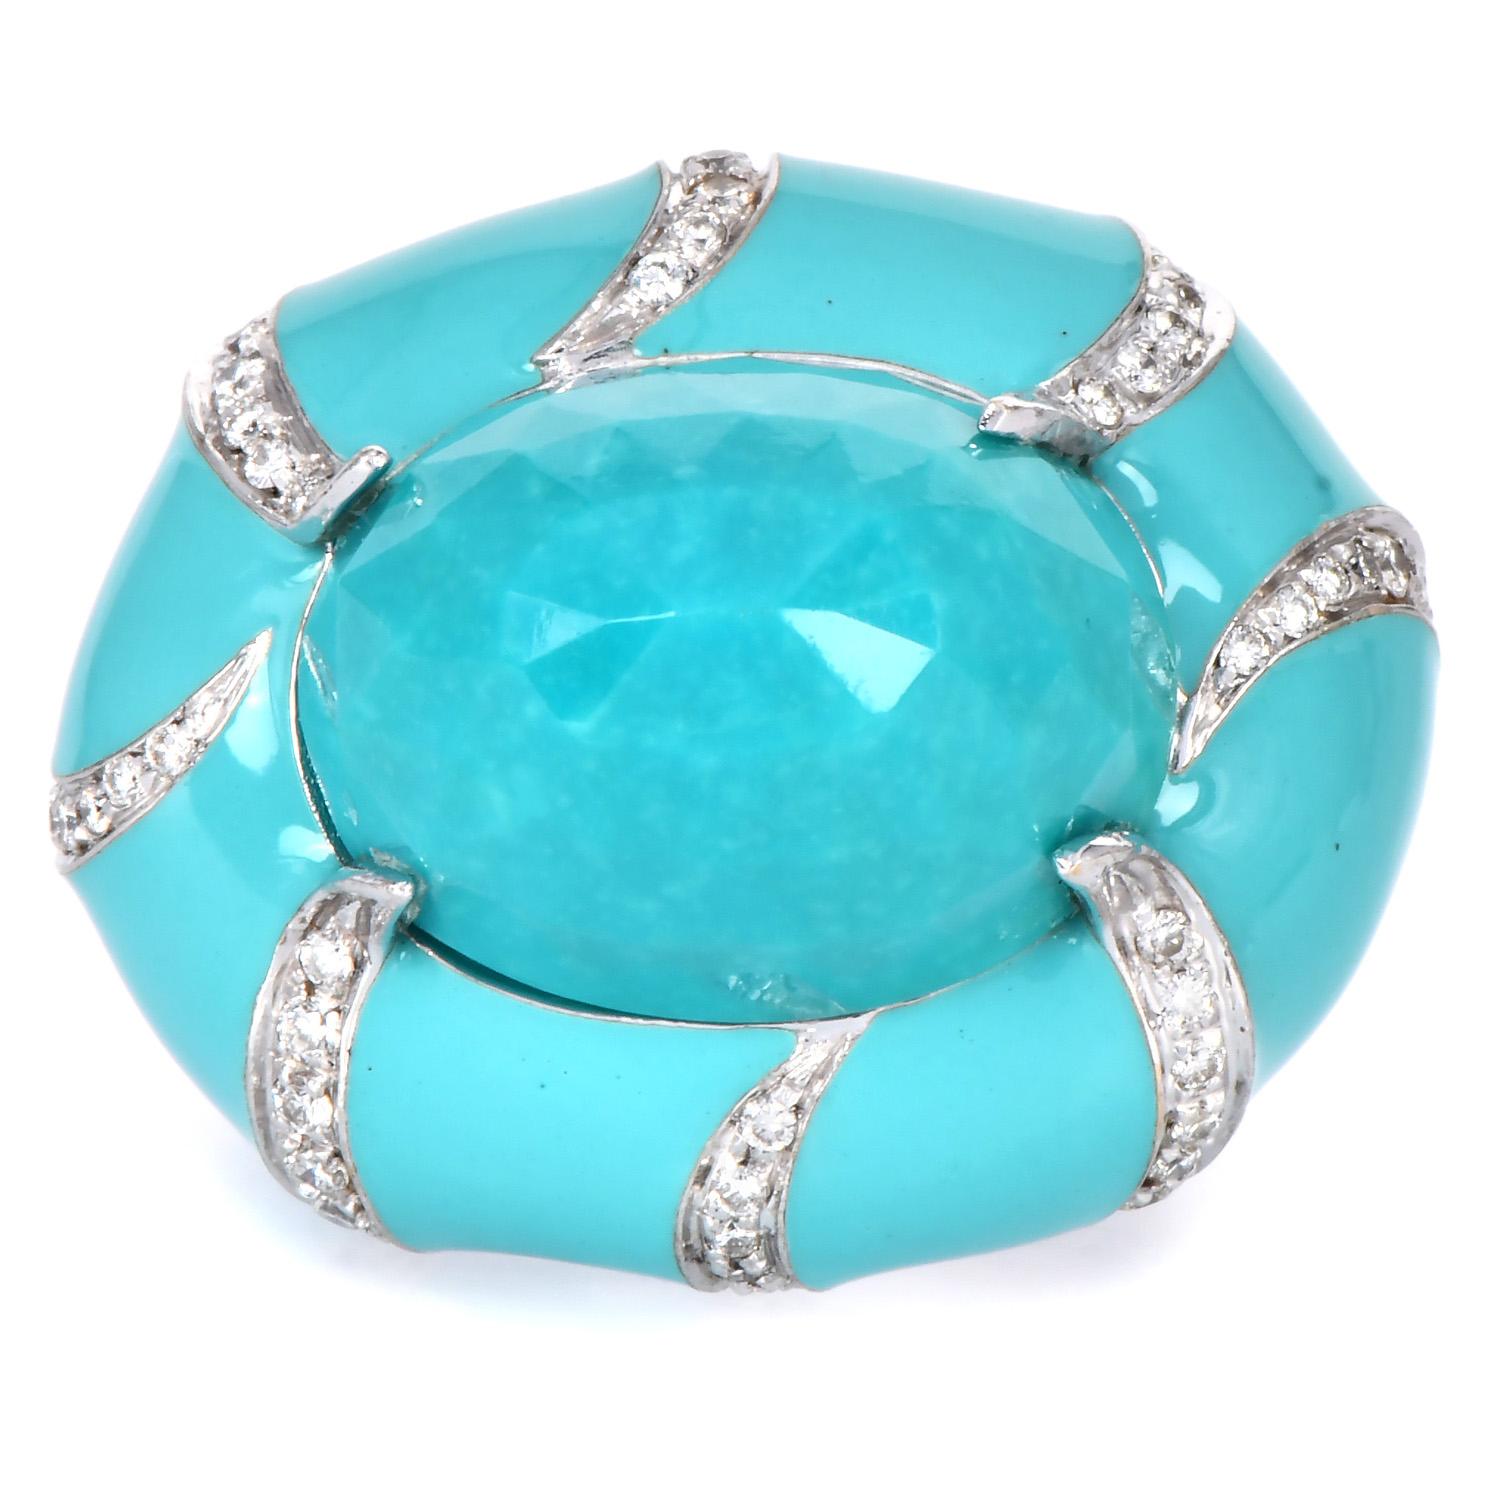 An exquisite mid-century estate ring, depicting a stunning vintage Egyptian turban design.
This piece features a beautifully faceted, sugarloaf dome turquoise at its center, elegantly set with diamond-encrusted wave-like prongs.
The ring is further